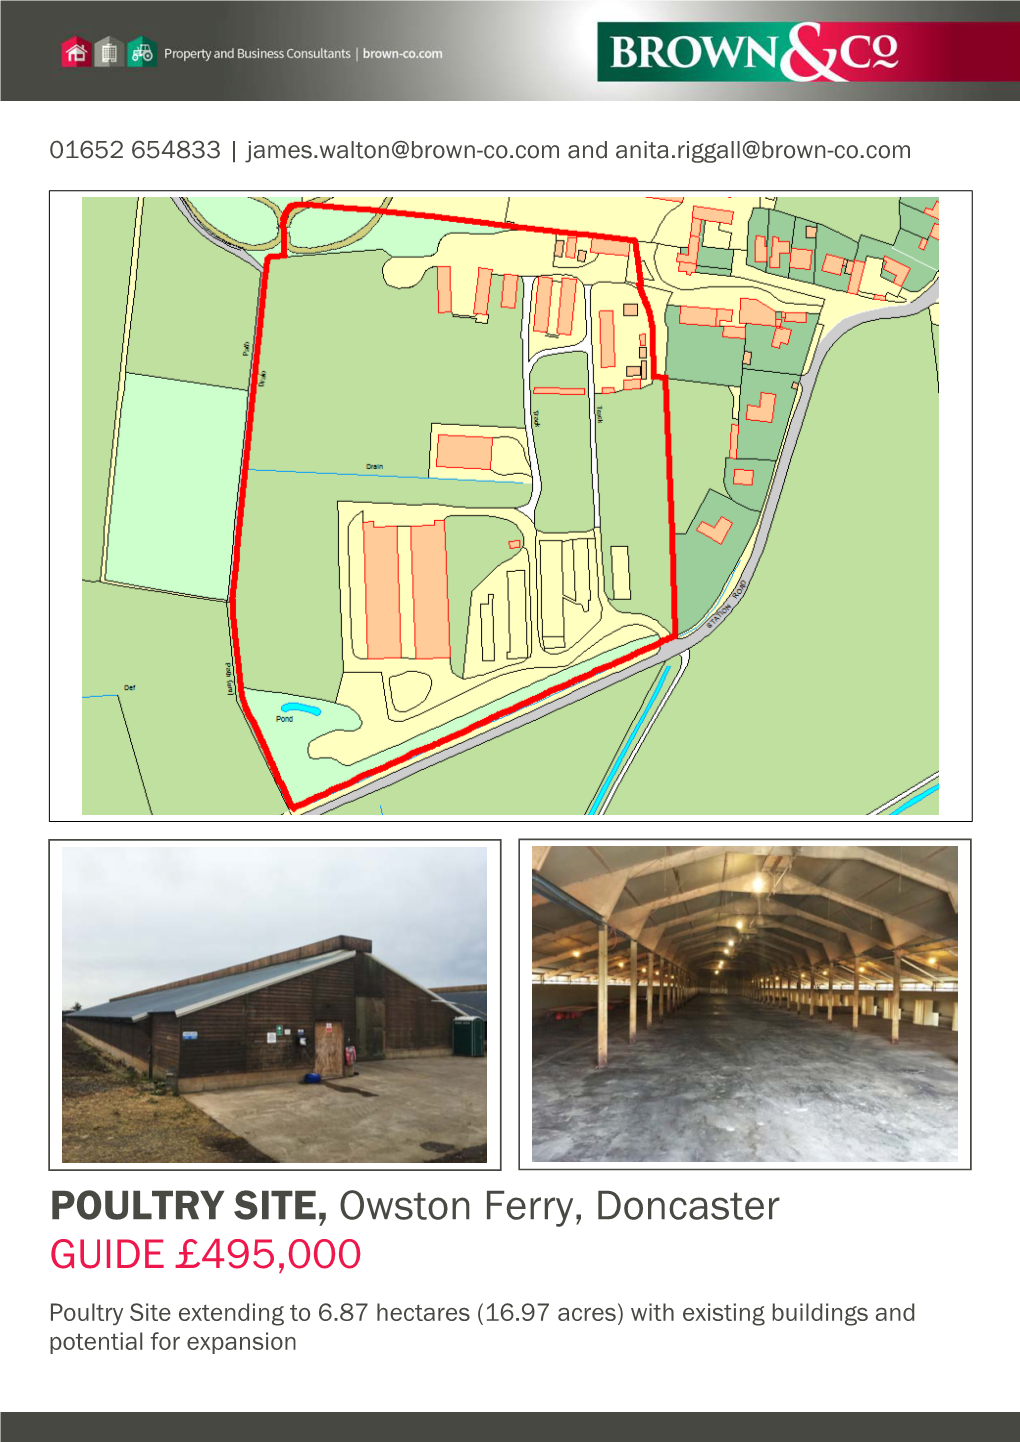 POULTRY SITE, Owston Ferry, Doncaster GUIDE £495,000 Poultry Site Extending to 6.87 Hectares (16.97 Acres) with Existing Buildings and Potential for Expansion